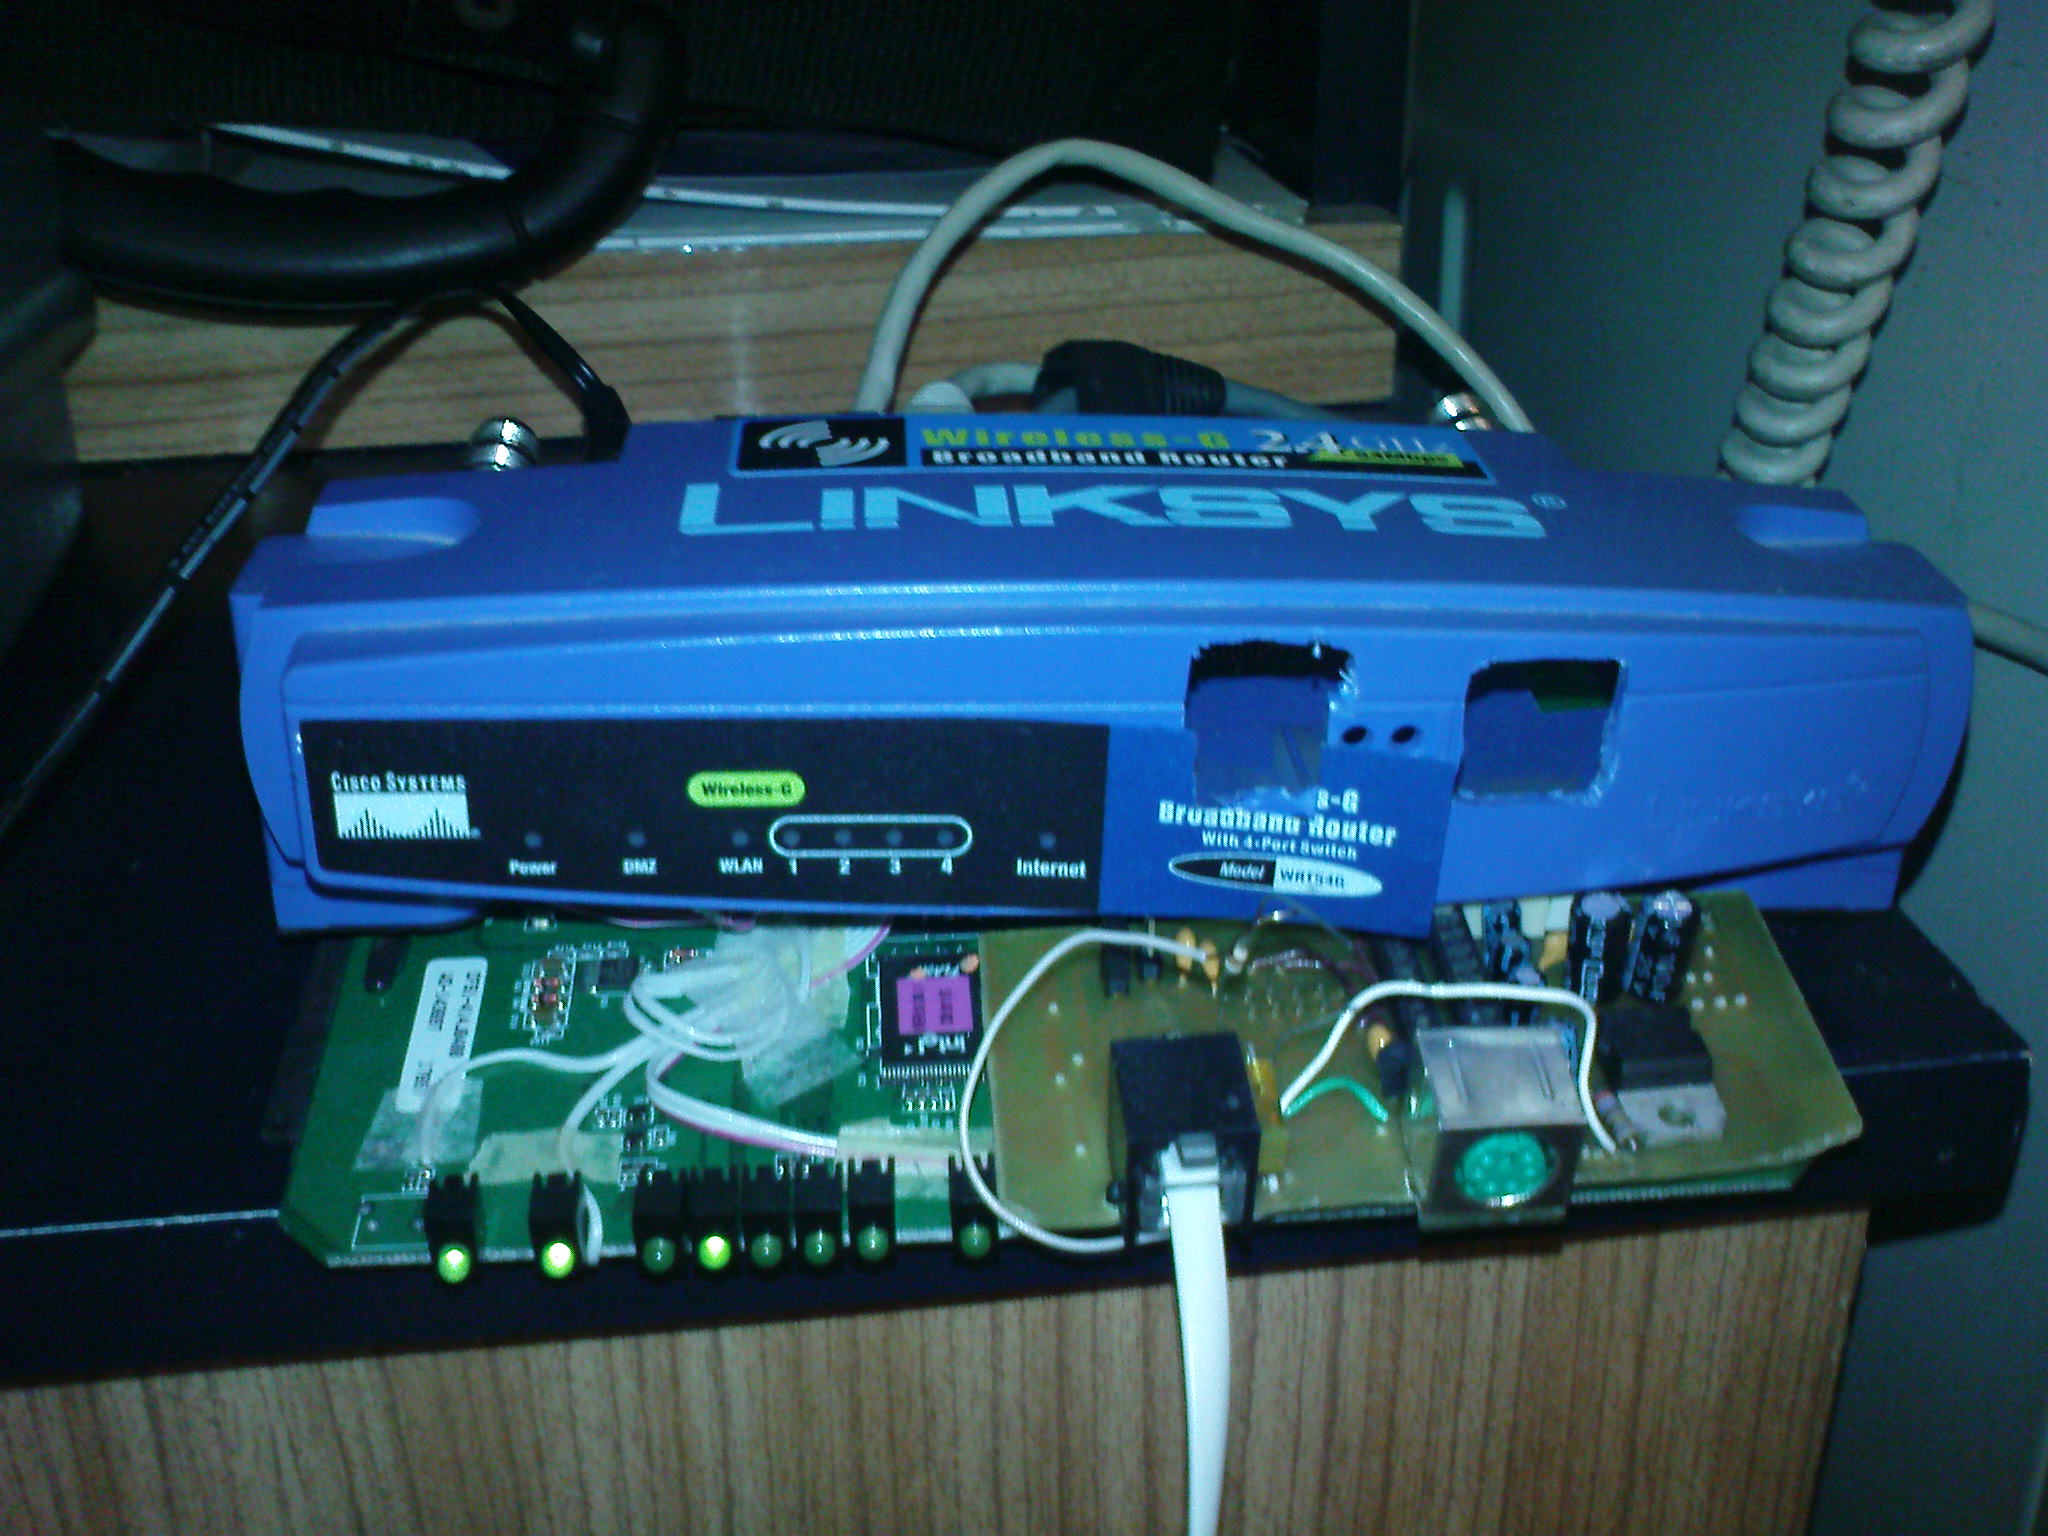 Router front